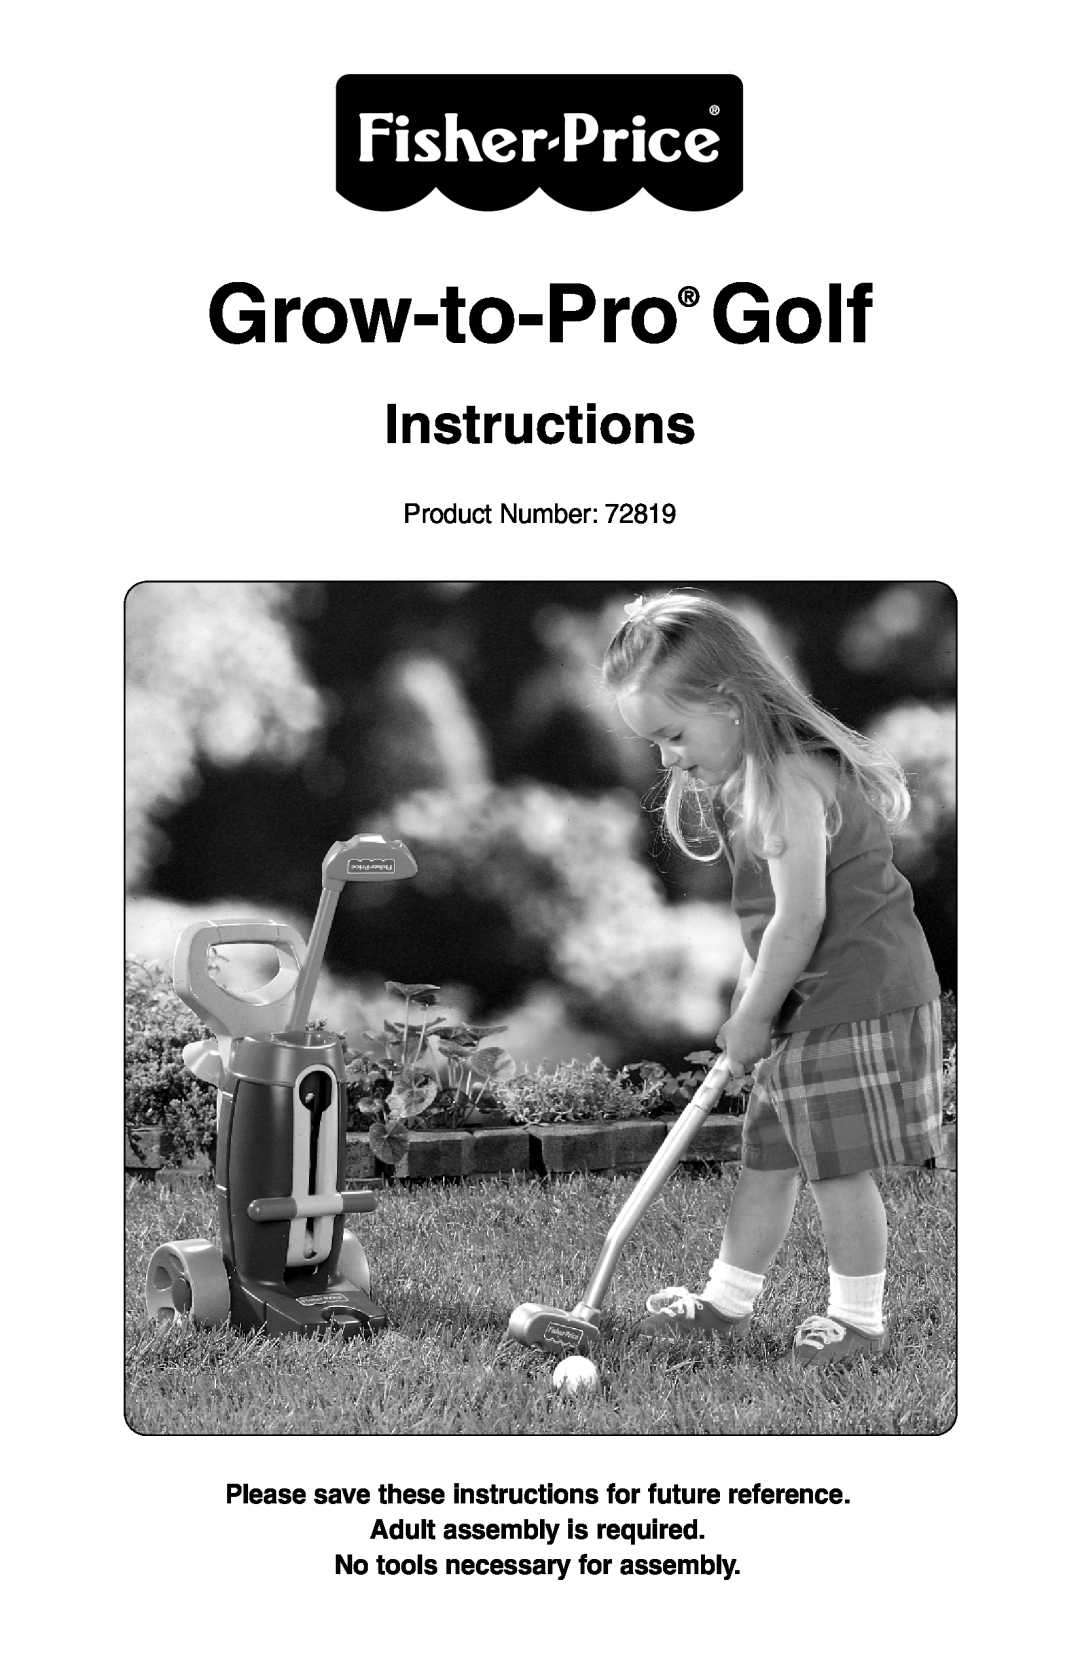 Fisher-Price 72819 manual Adult assembly is required, No tools necessary for assembly, Grow-to-Pro Golf, Instructions 